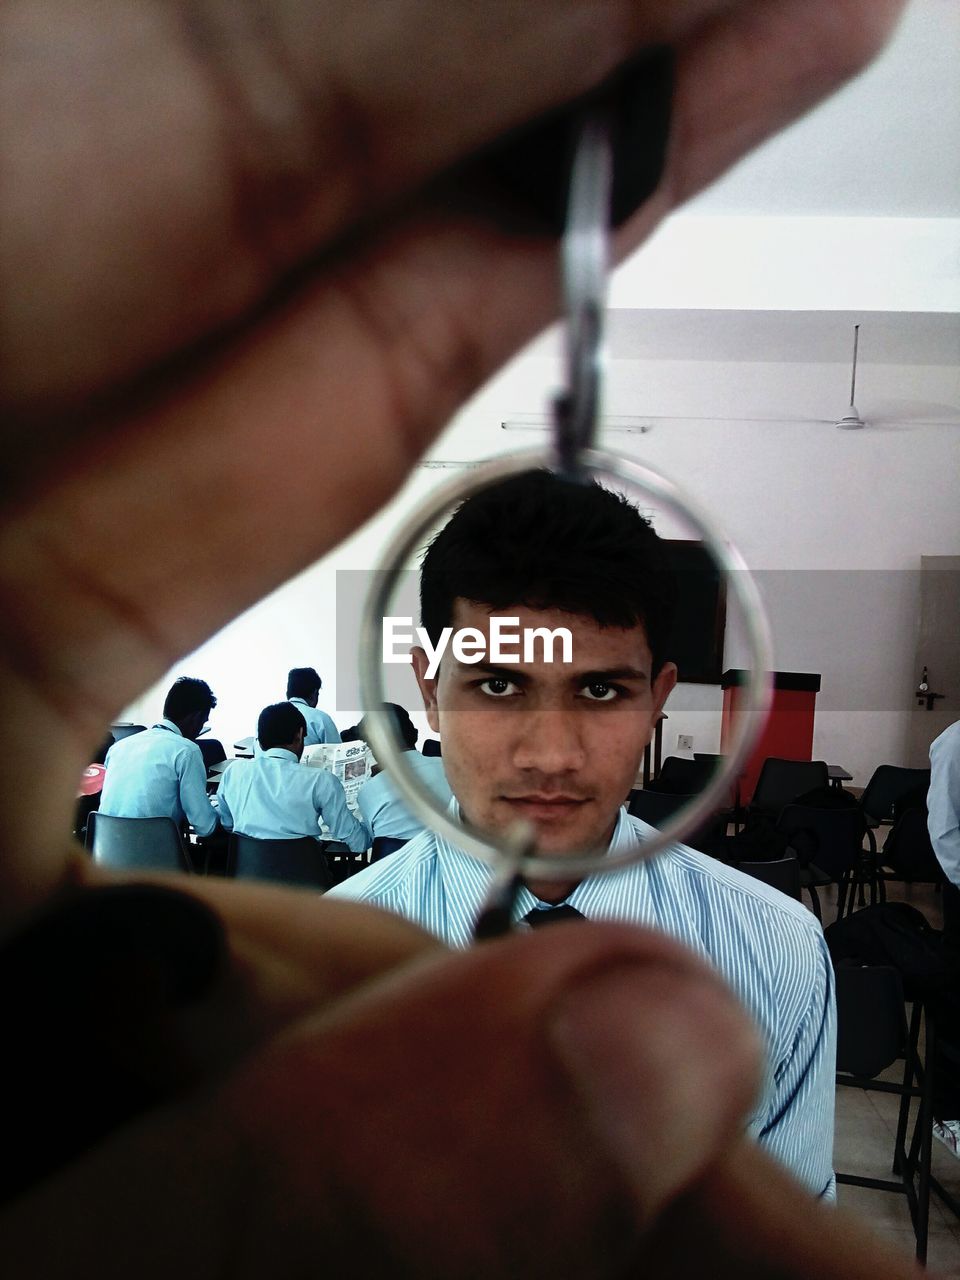 Cropped hand holding key ring against student